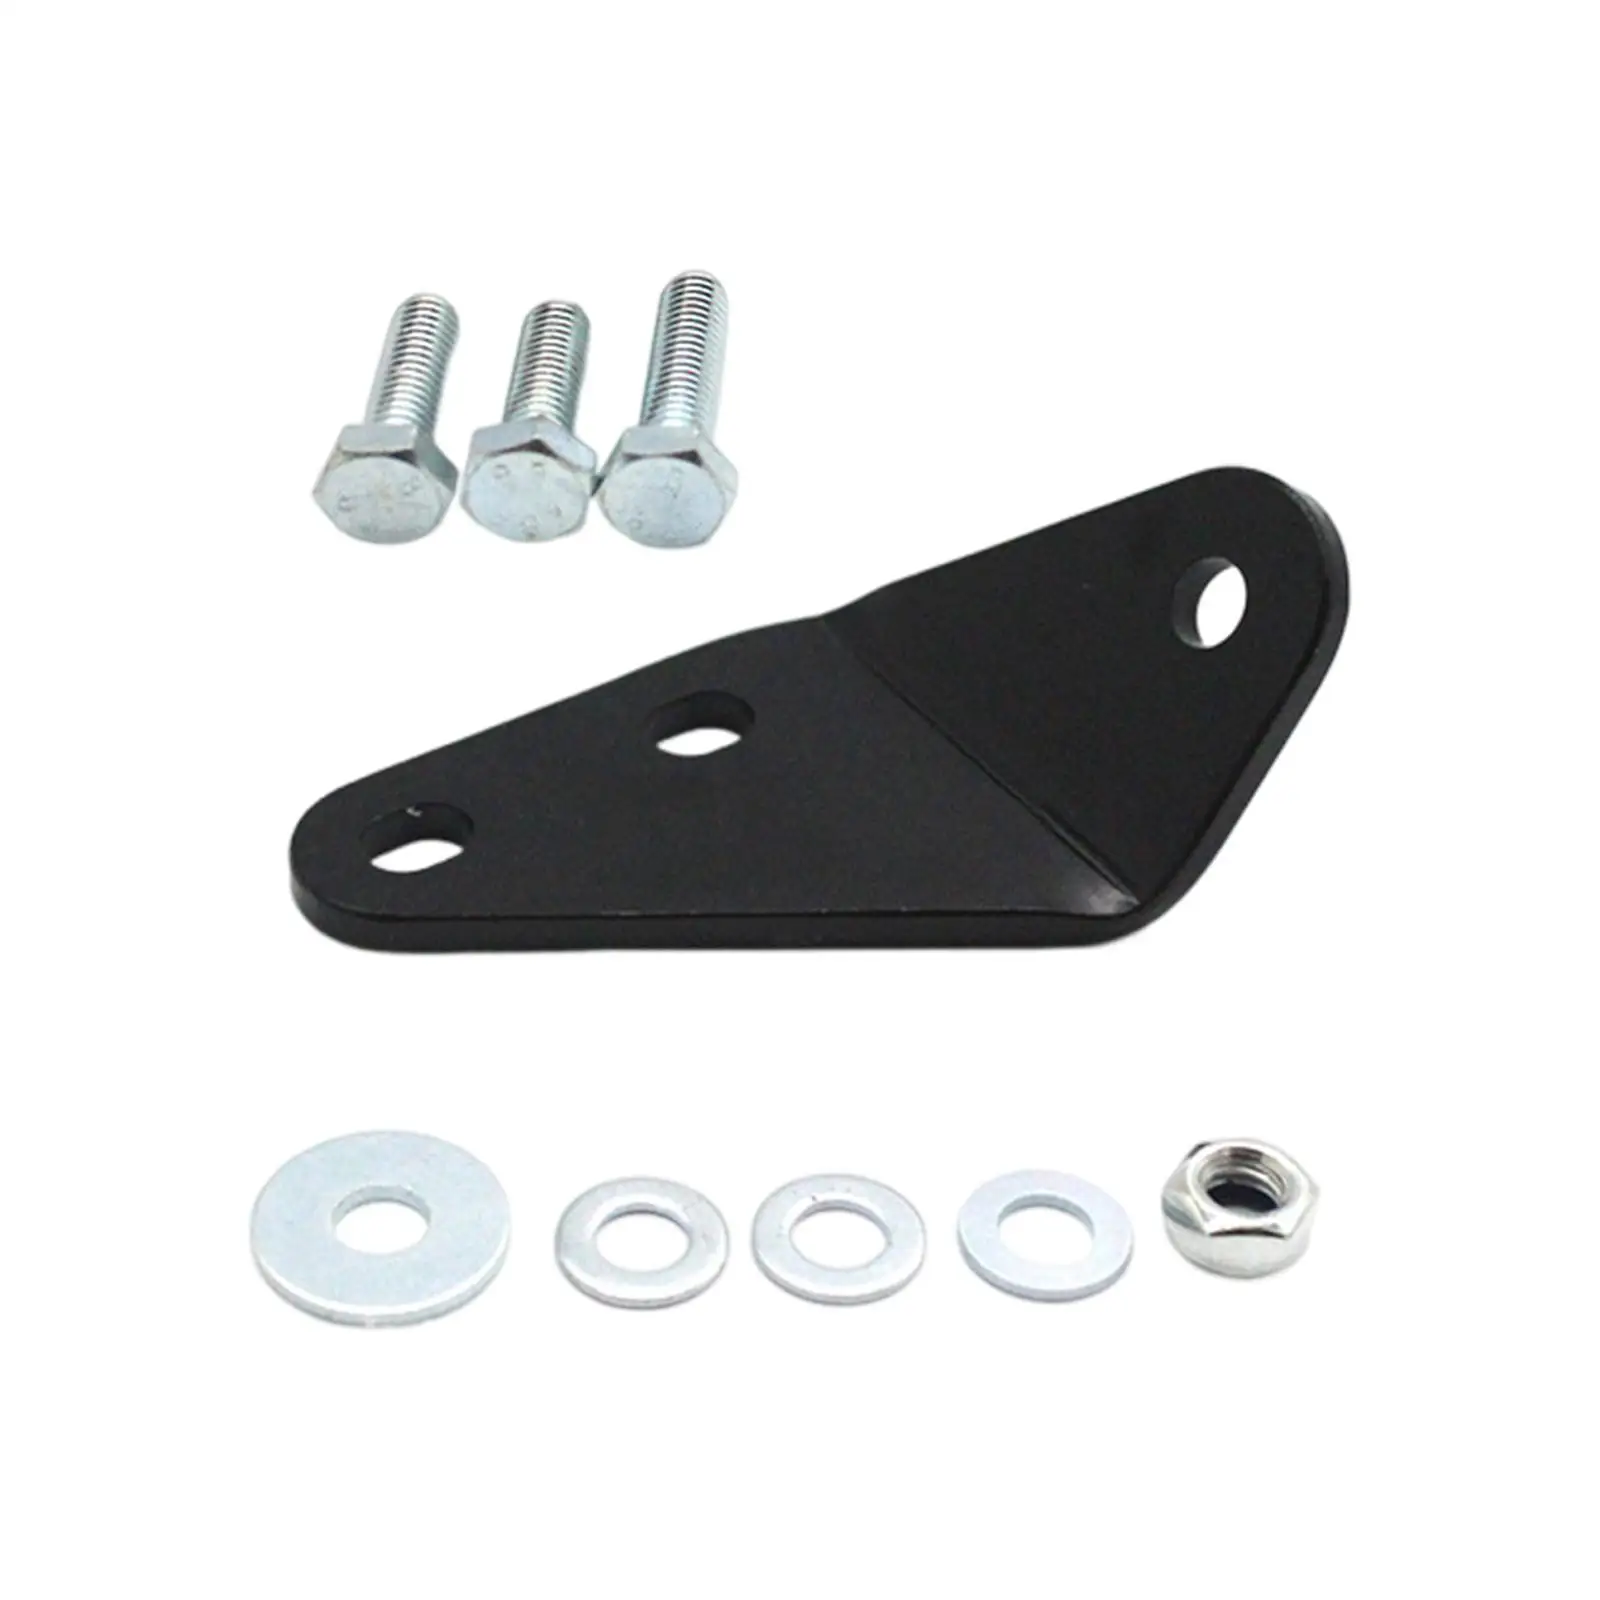 Clutch Pedal Bracket Metal Easy Installation High Performance Replace for VW T4 Transporter Caravelle Multivan Accessories